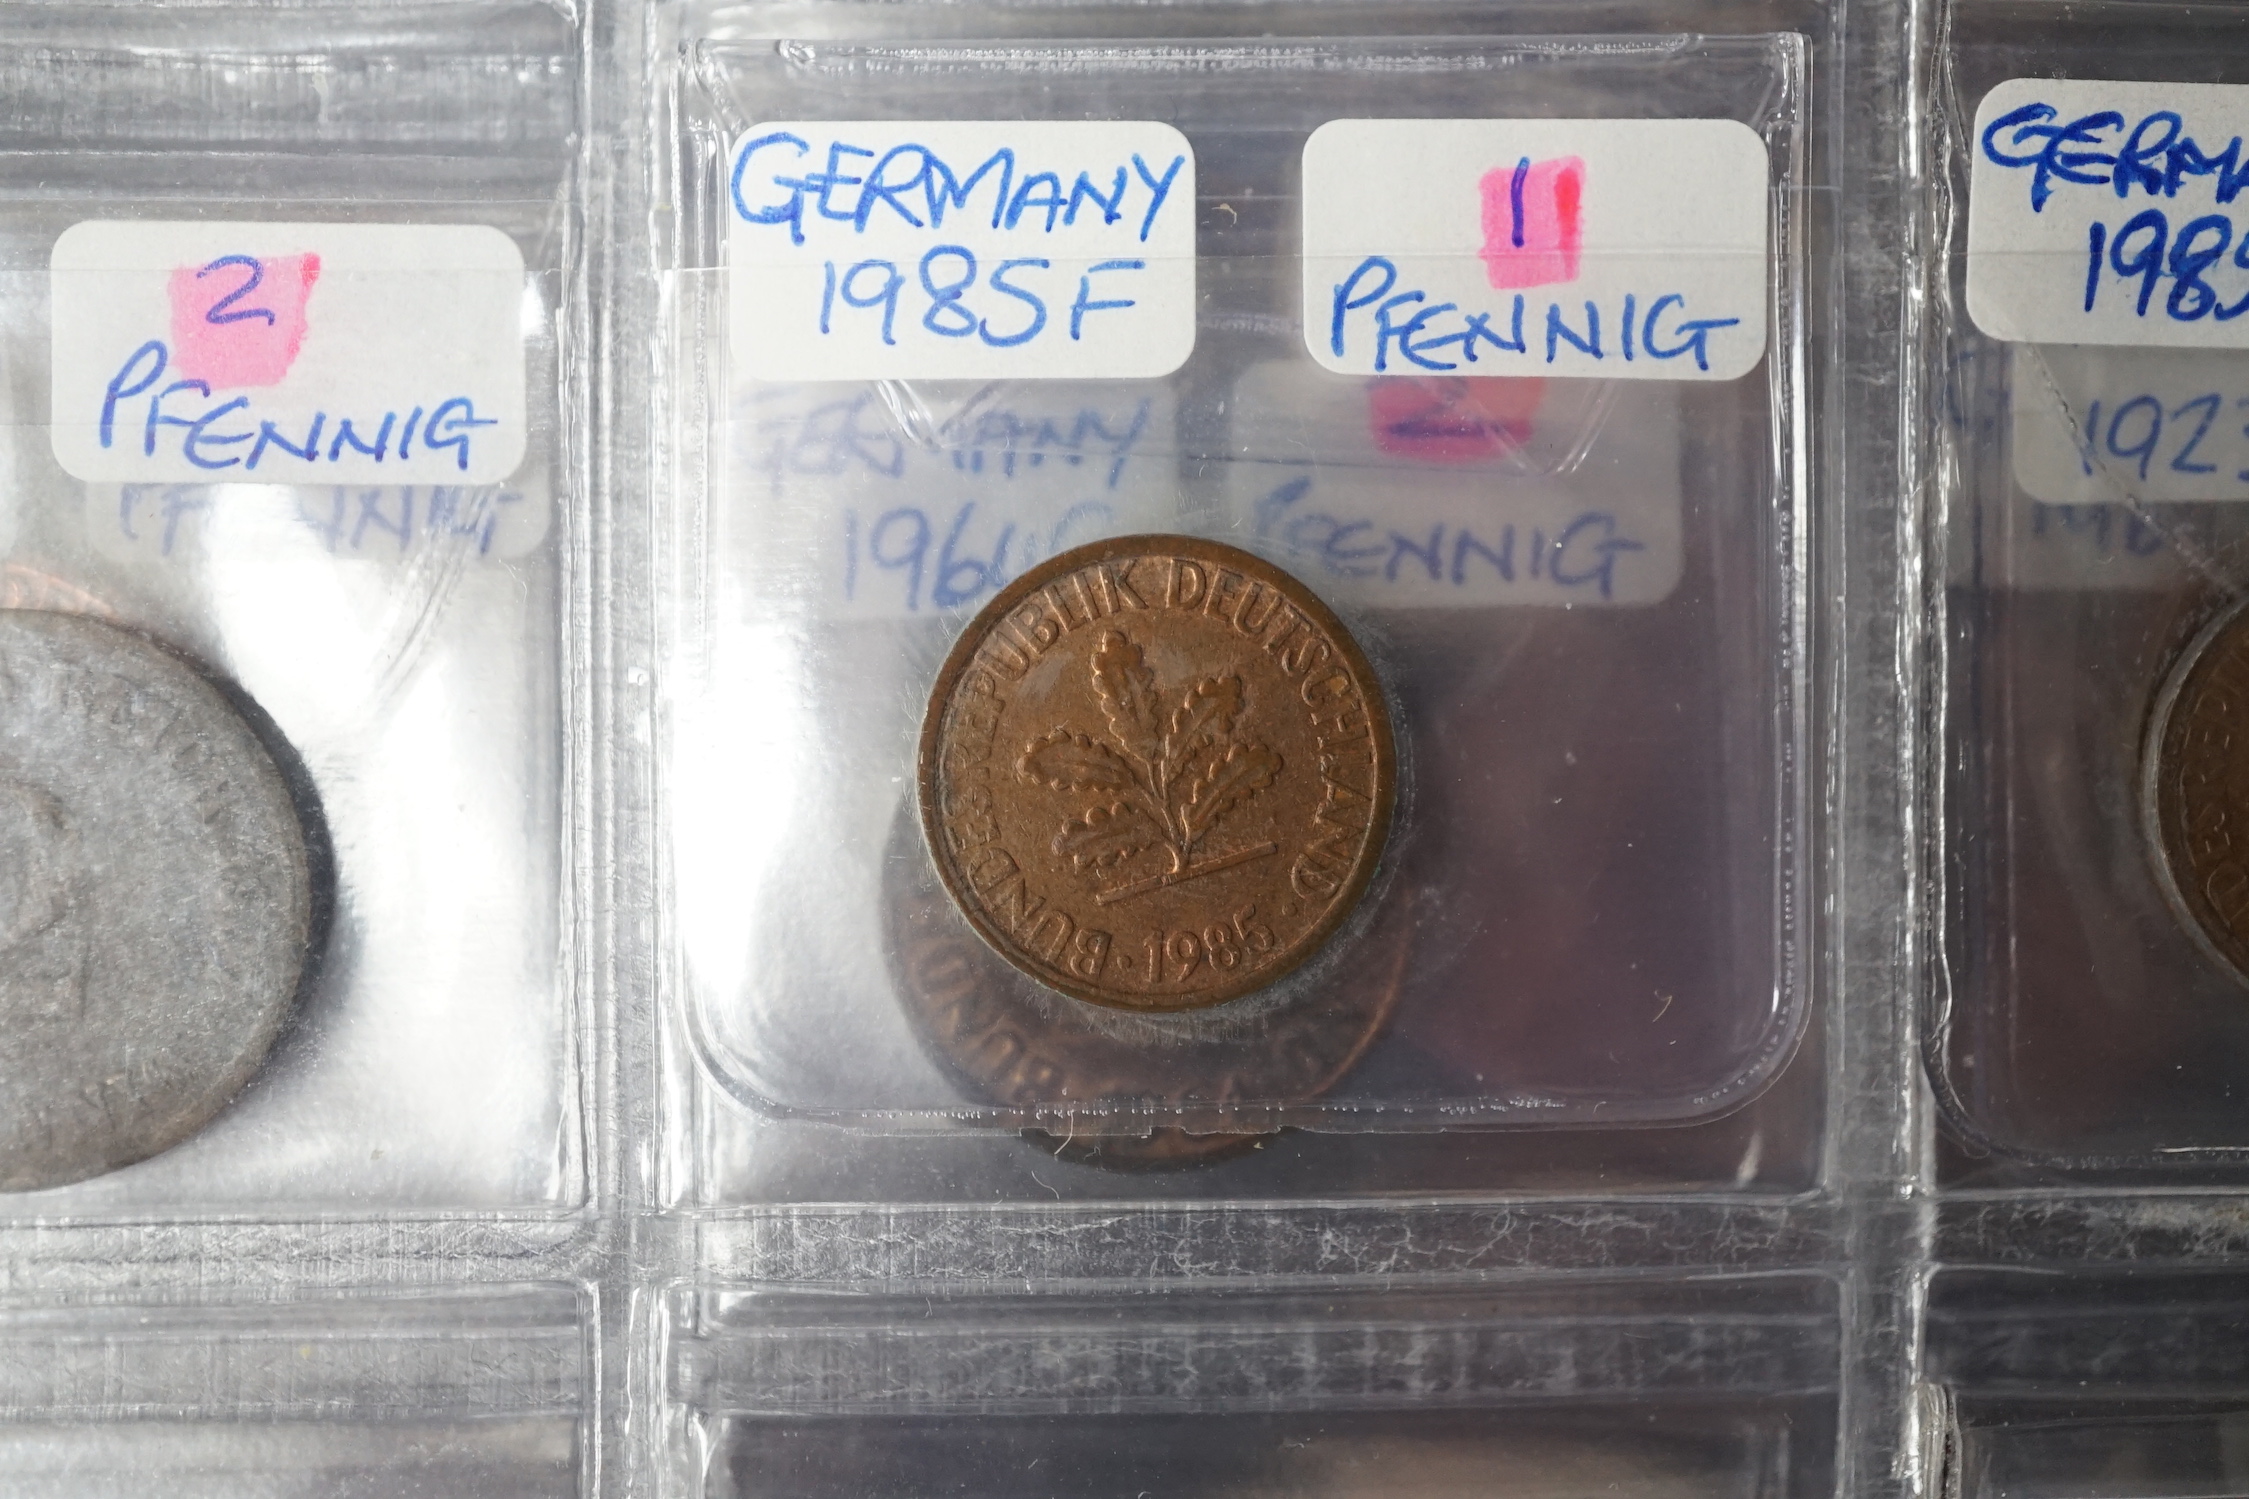 Two albums of various German coins